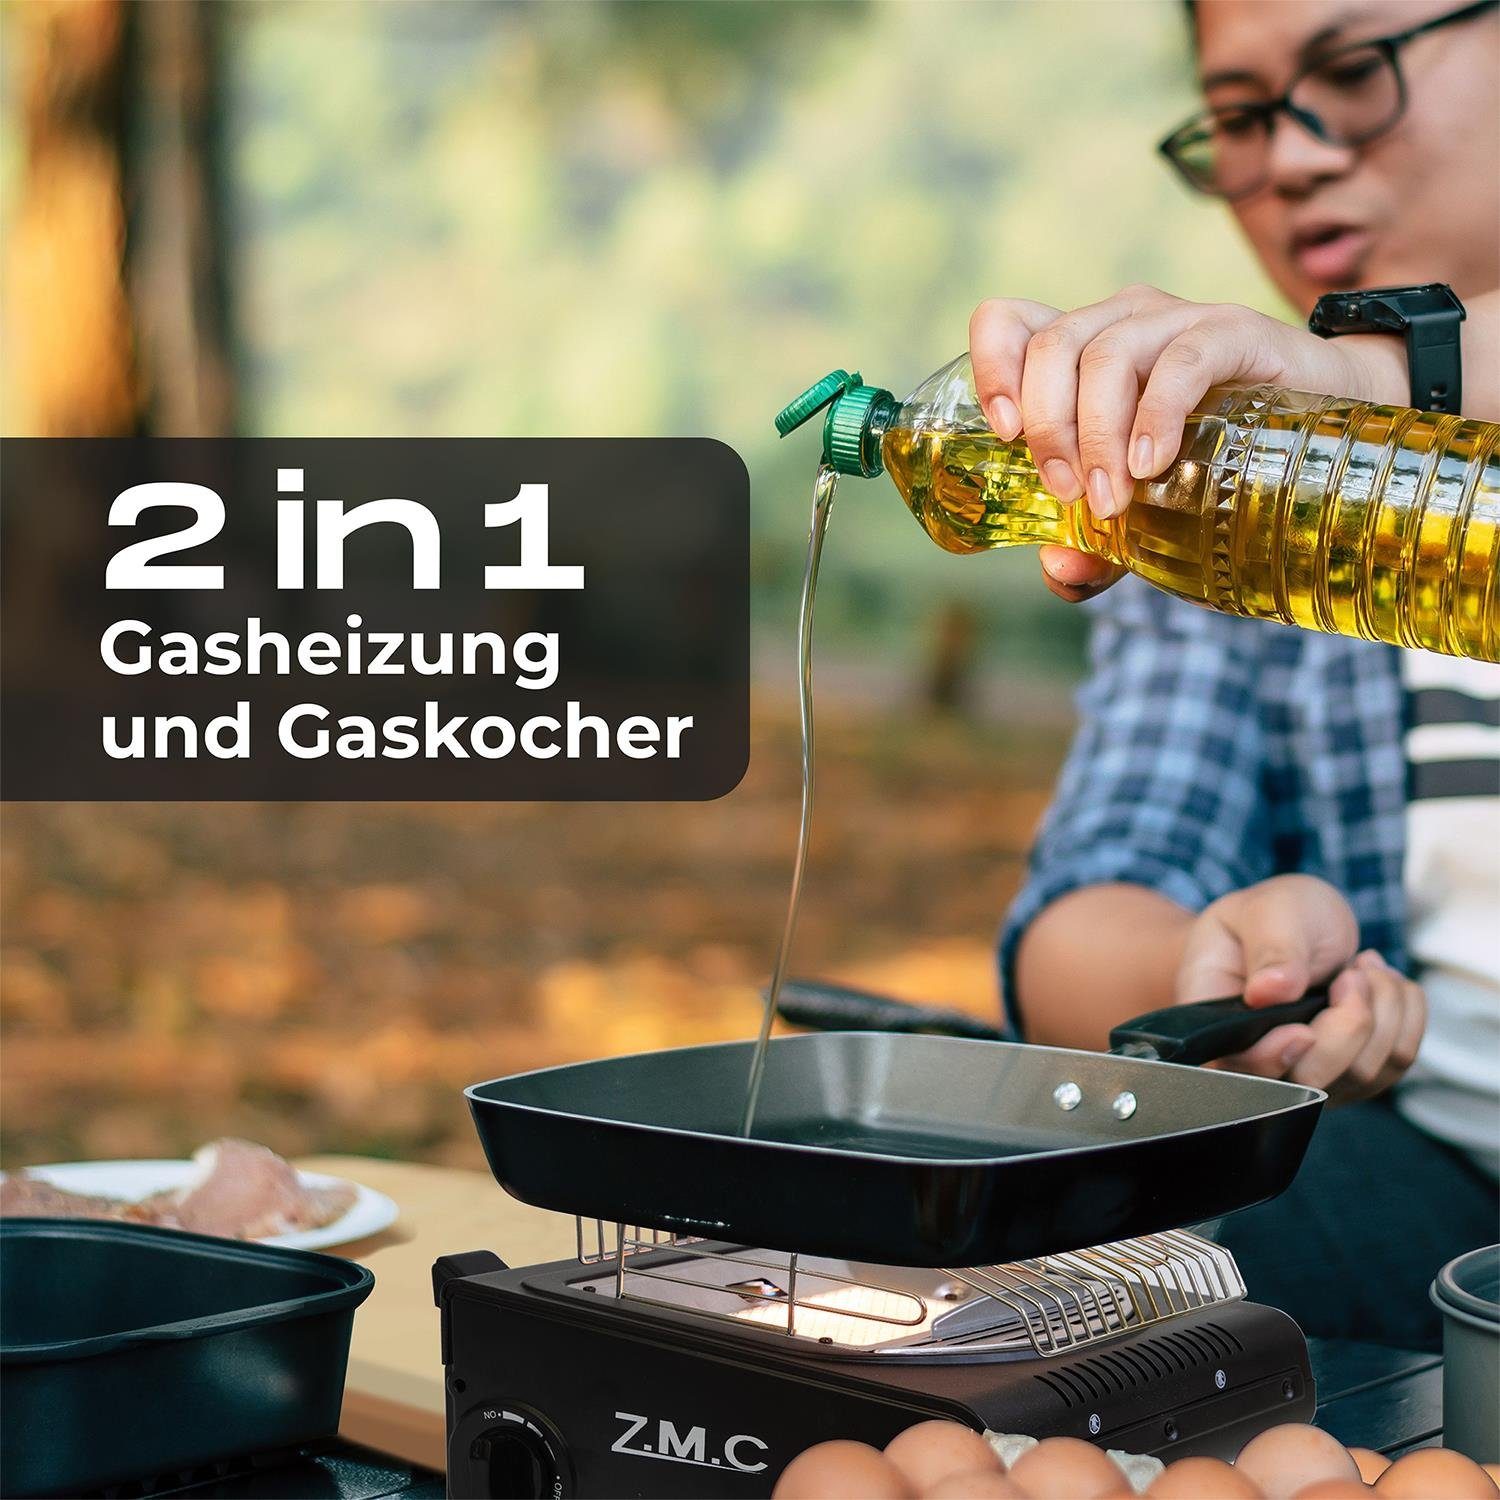 MSF-1A, + 2in1 Heizstrahler Z.M.C.GMBH Campingkocher Camping Zeltheizung Tragbare Butangas Camping Gaskartuschen Gaskocher Heizung 8x 227g Heizstrahler Gasheizung